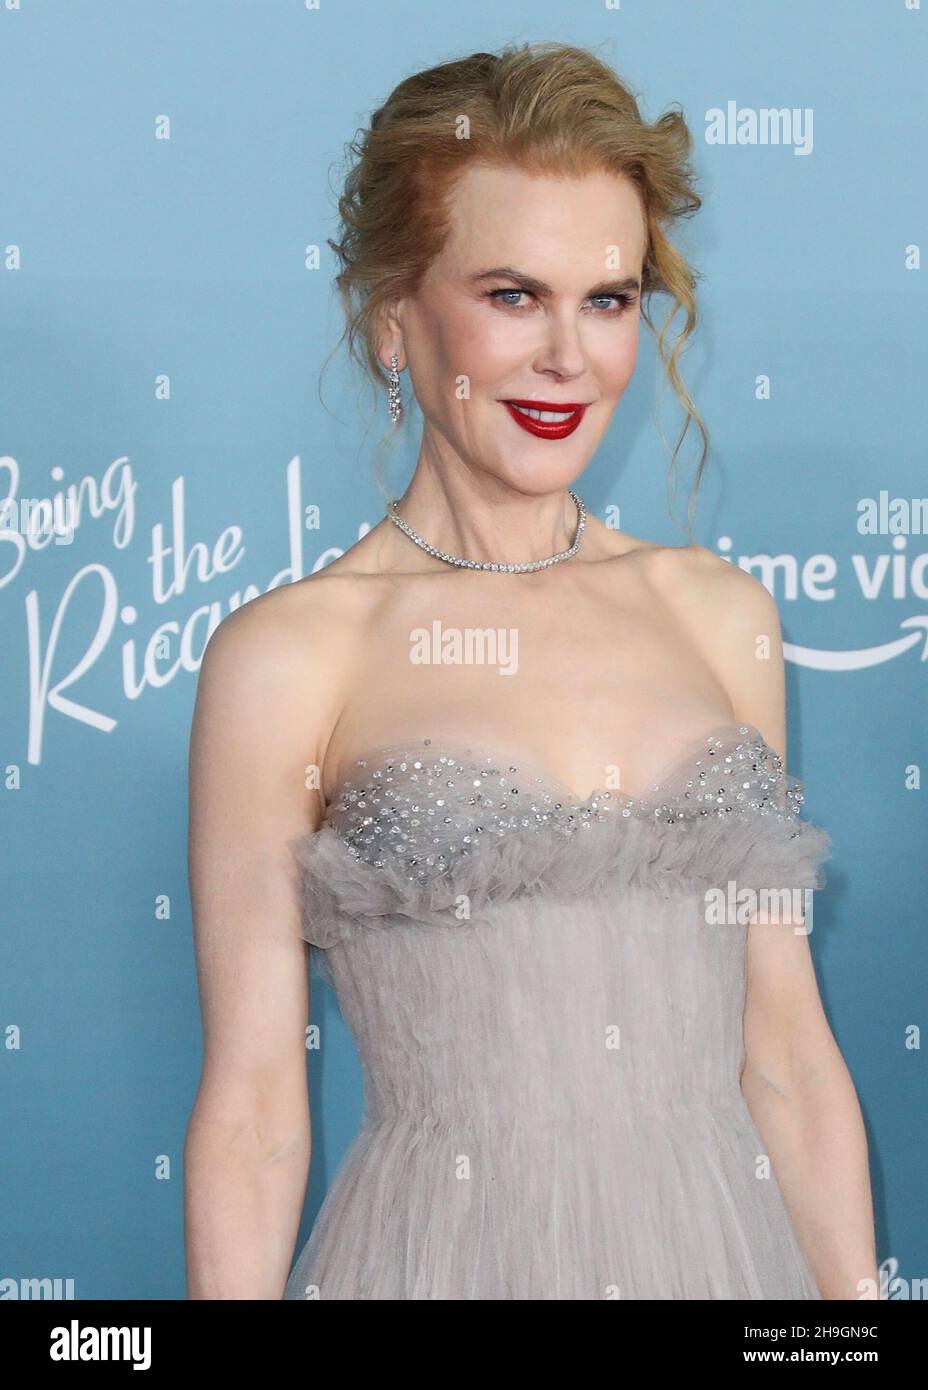 LOS ANGELES, CALIFORNIA, USA - DECEMBER 06: Actress Nicole Kidman wearing an Armani Prive gown, Jimmy Choo shoes, and an Omega watch arrives at the Los Angeles Premiere Of Amazon Studios' 'Being The Ricardos' held at the Academy Museum of Motion Pictures on December 6, 2021 in Los Angeles, California, United States. (Photo by Xavier Collin/Image Press Agency/Sipa USA) Stock Photo